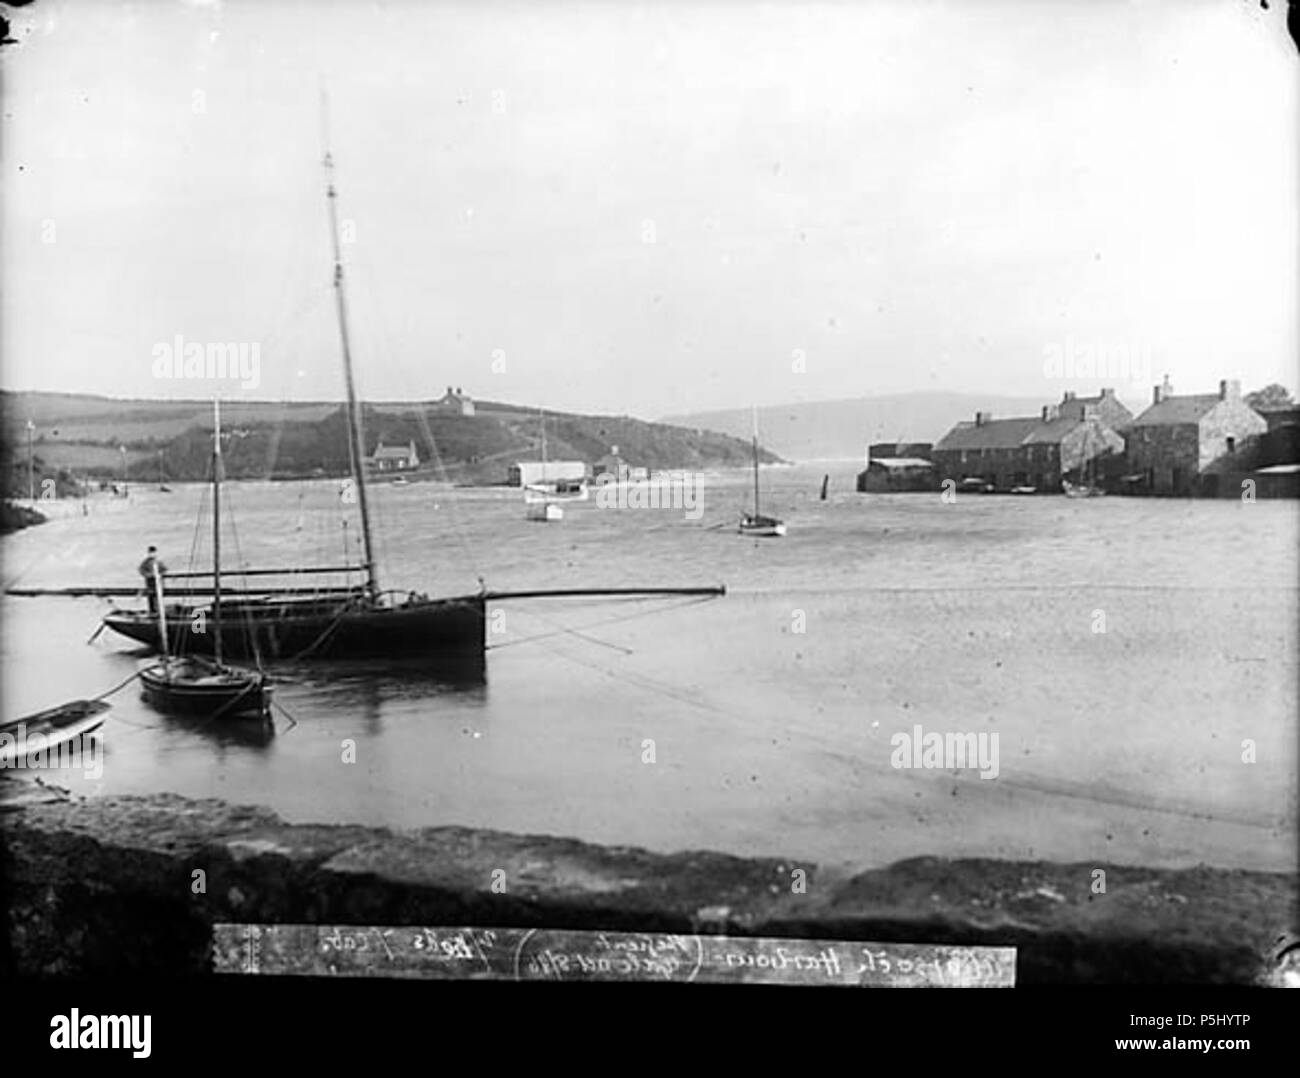 [Abersoch harbour after the great gale of October 1896] [graphic].. 1 negative : glass, dry plate, b&w ; 16.5 x 21.5 cm. 1896.   John Thomas  (1838–1905)     Description British photographer specialising in landscape images of Wales  Date of birth/death 14 April 1838 October 1905  Location of birth/death Lampeter Liverpool  Authority control  : Q3403561 VIAF:48732962 ISNI:0000 0000 6706 7024 ULAN:500069014 LCCN:nb2002016293 Open Library:OL5364581A WorldCat 53 Abersoch harbour after the great gale of October 1896 NLW3361170 Stock Photo